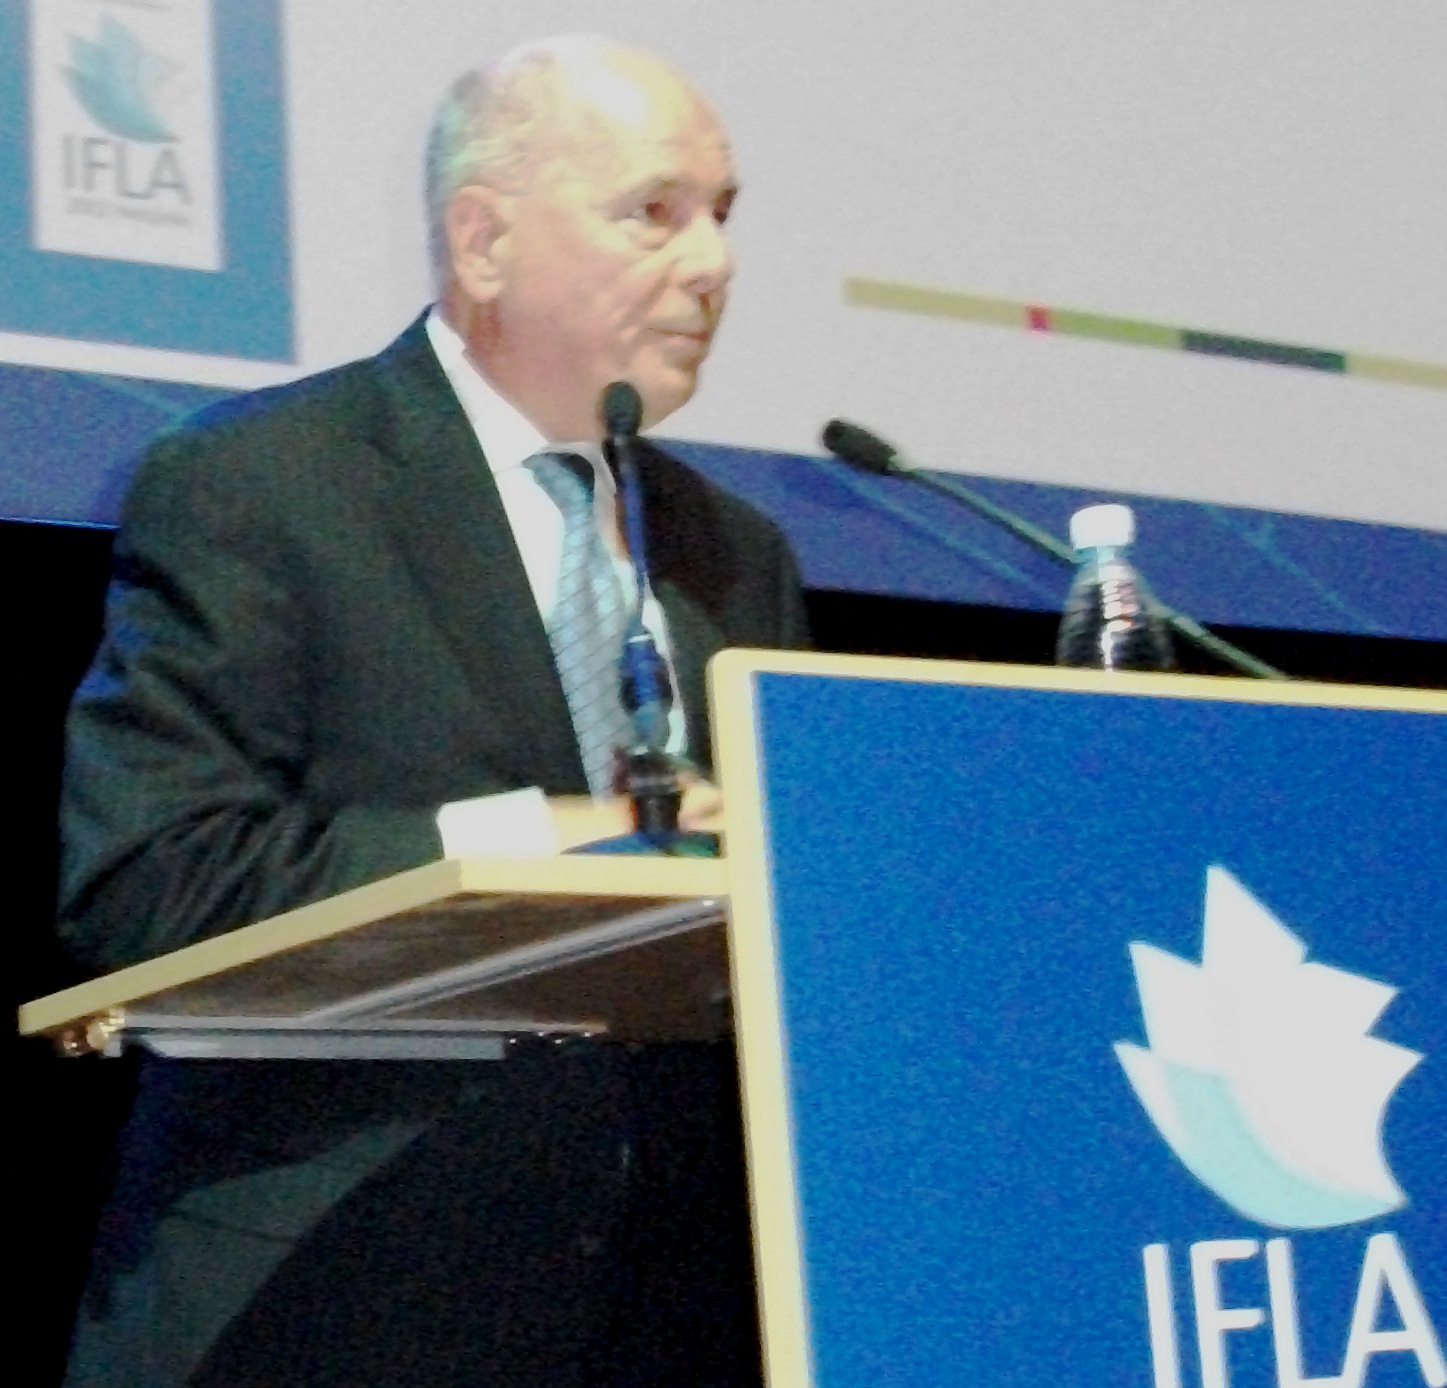 Winston Tabb of the United States was made an Honorary Fellow, IFLA’s highest honor.